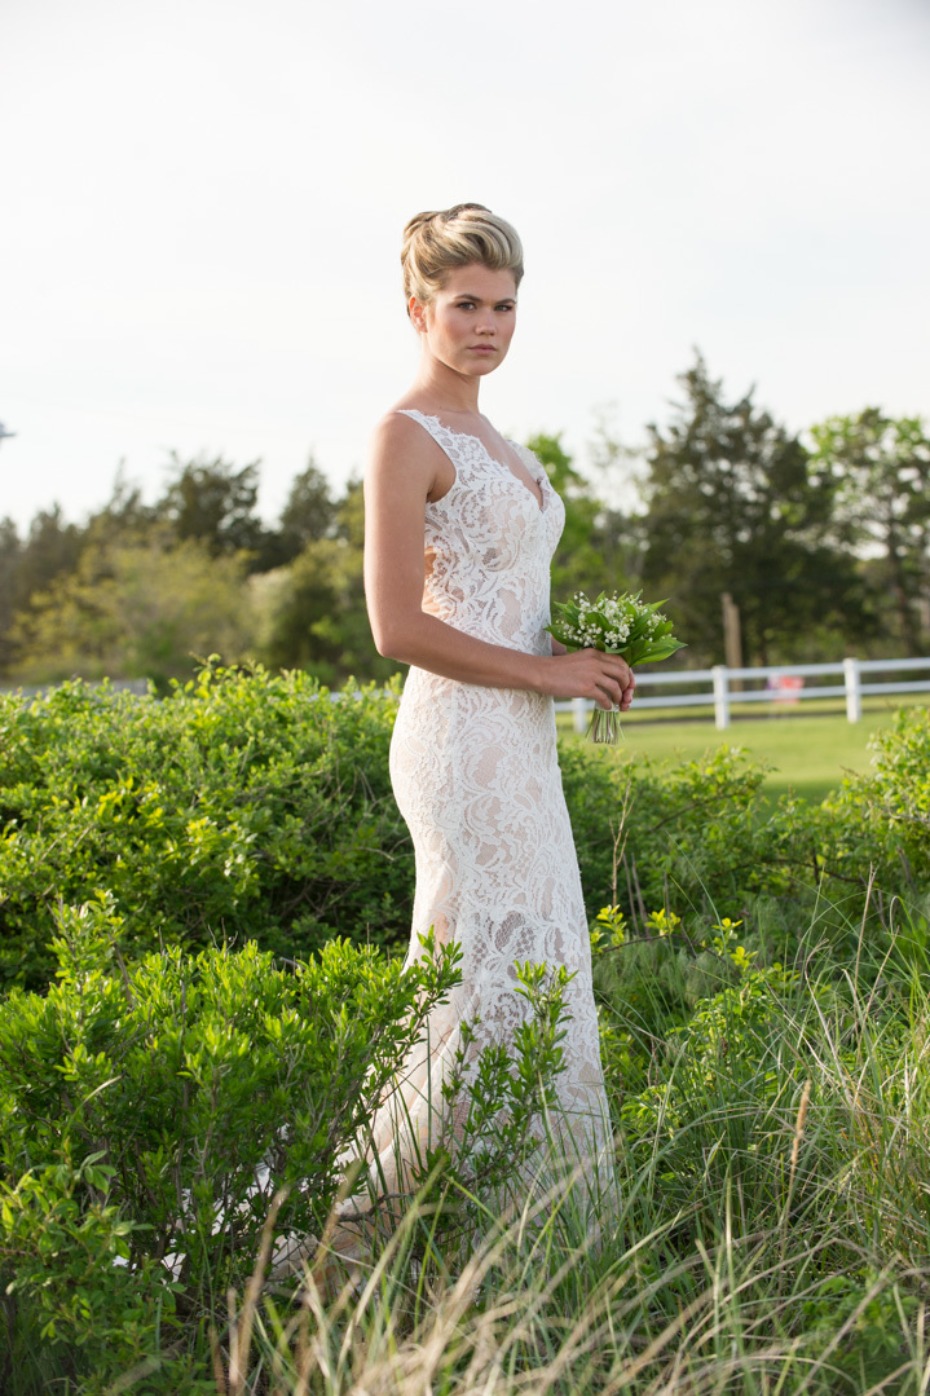 Bridal style for your summer wedding